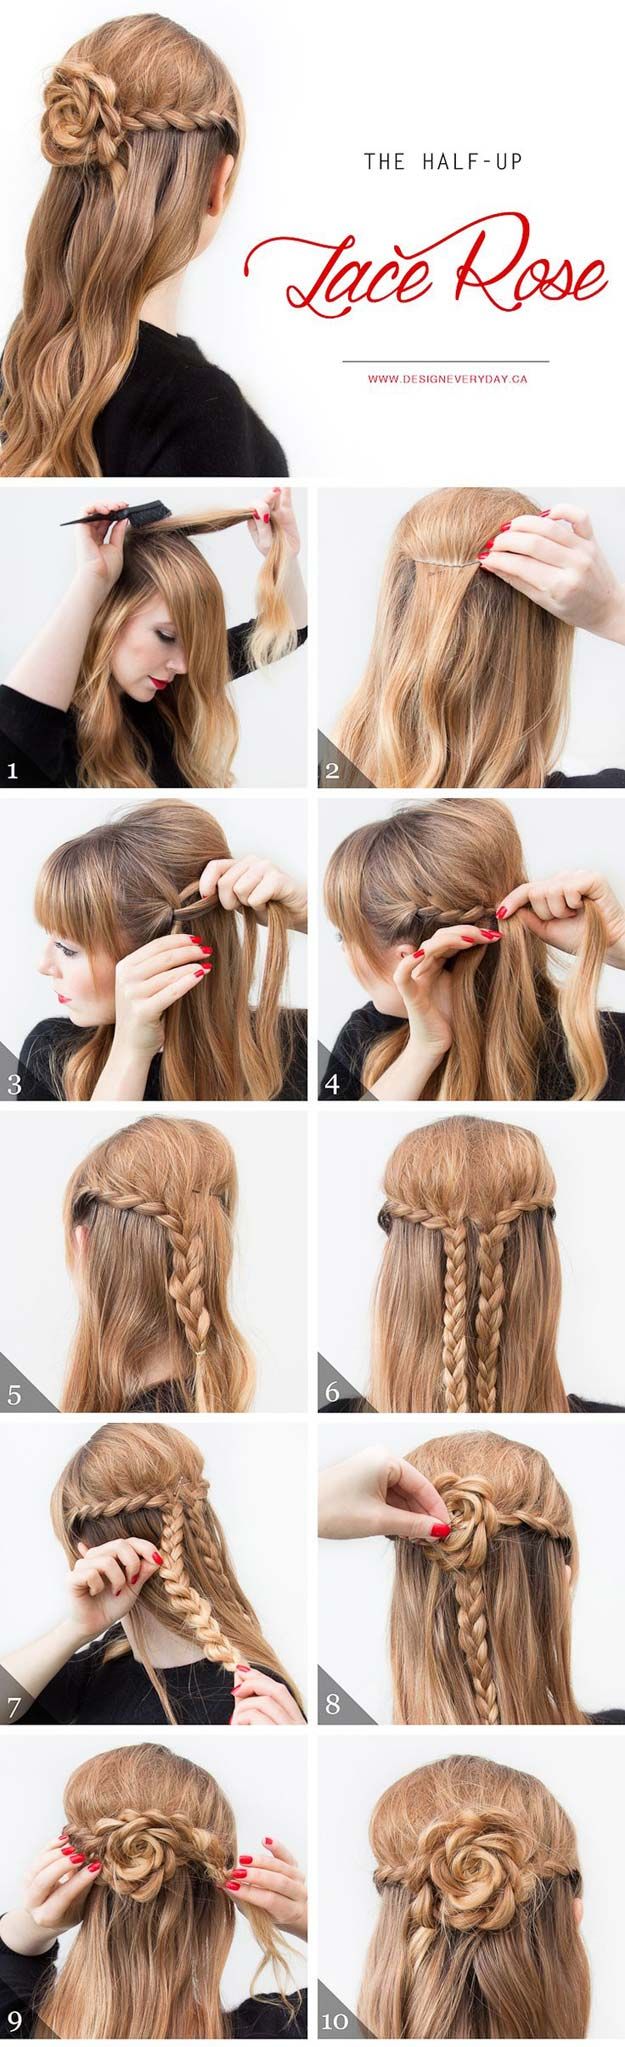 Hair Styles Ideas Diy Cool Easy Hairstyles That Real